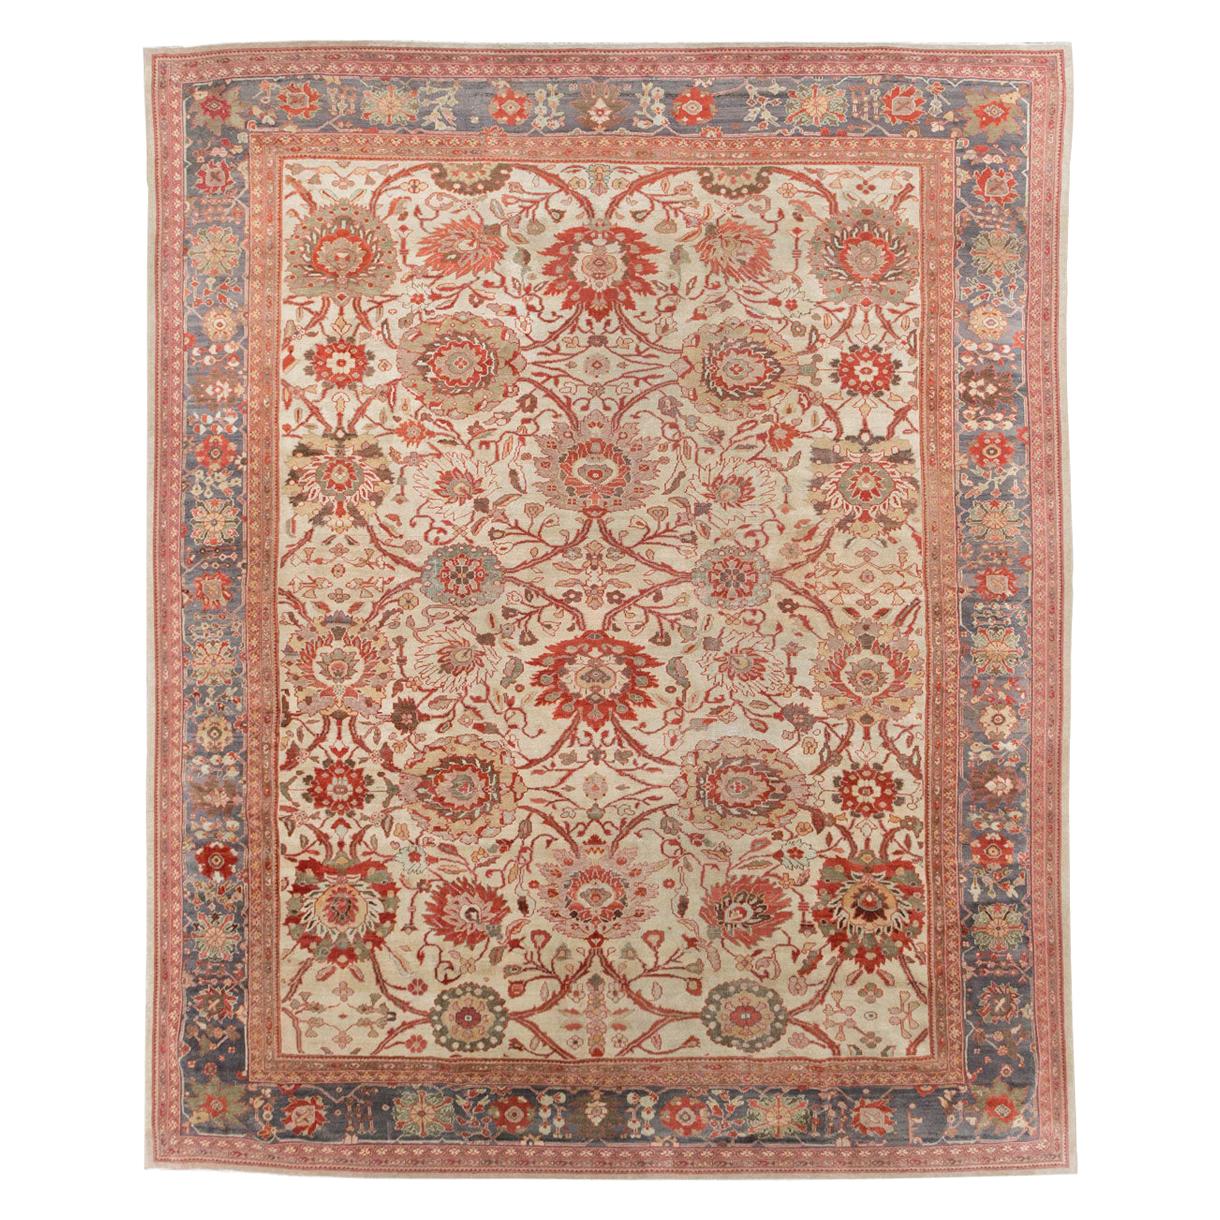 Early 20th Century Handmade Persian Sultanabad Large Carpet